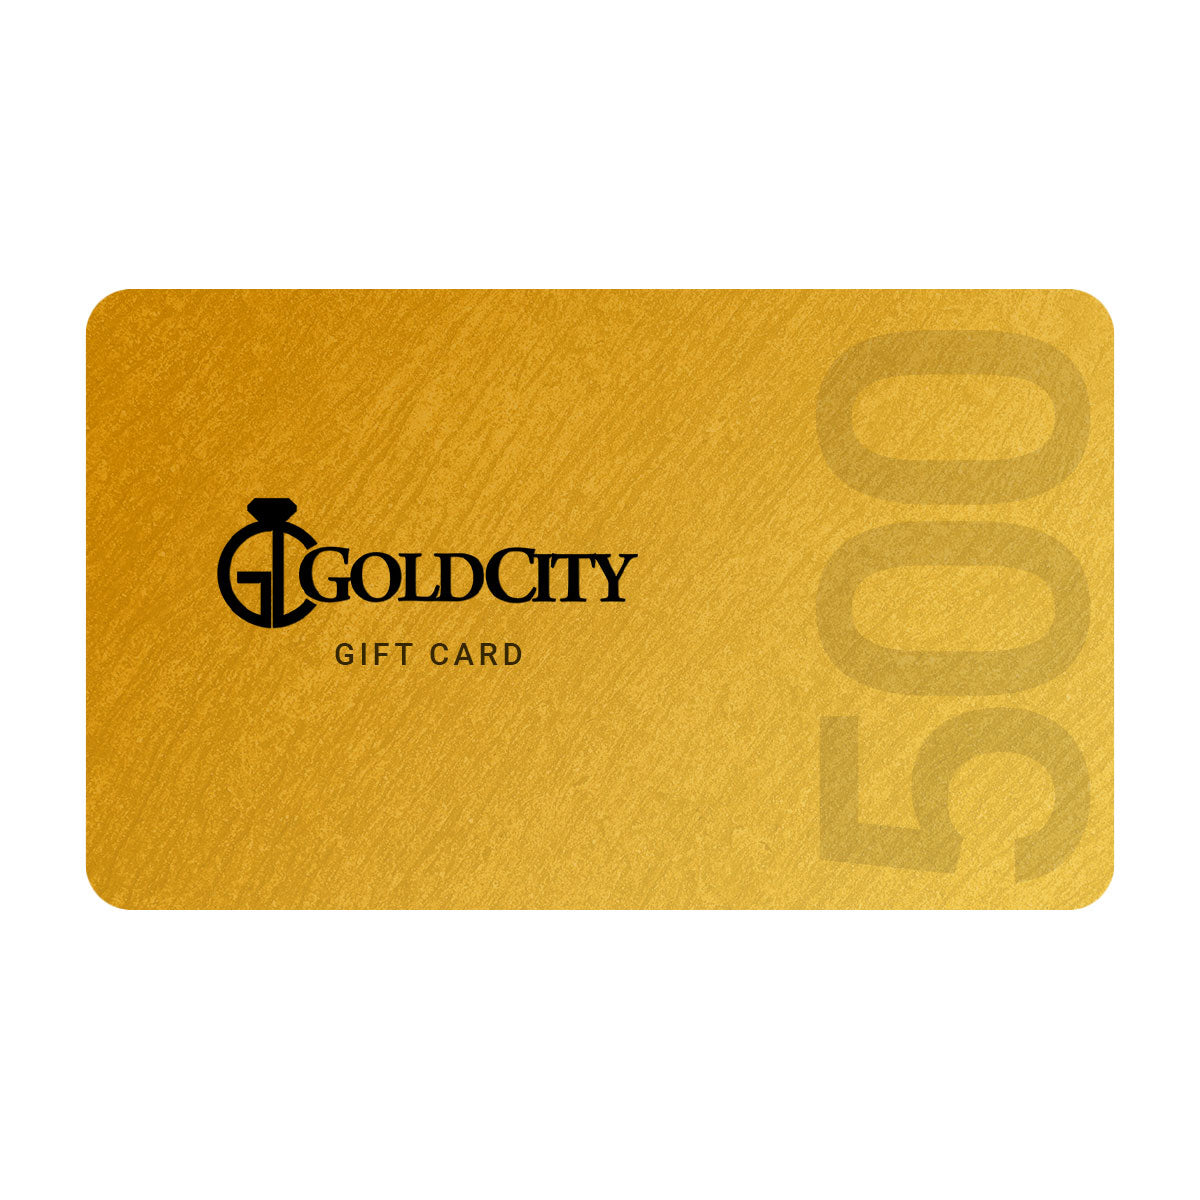 GOLD CITY GIFT CARD